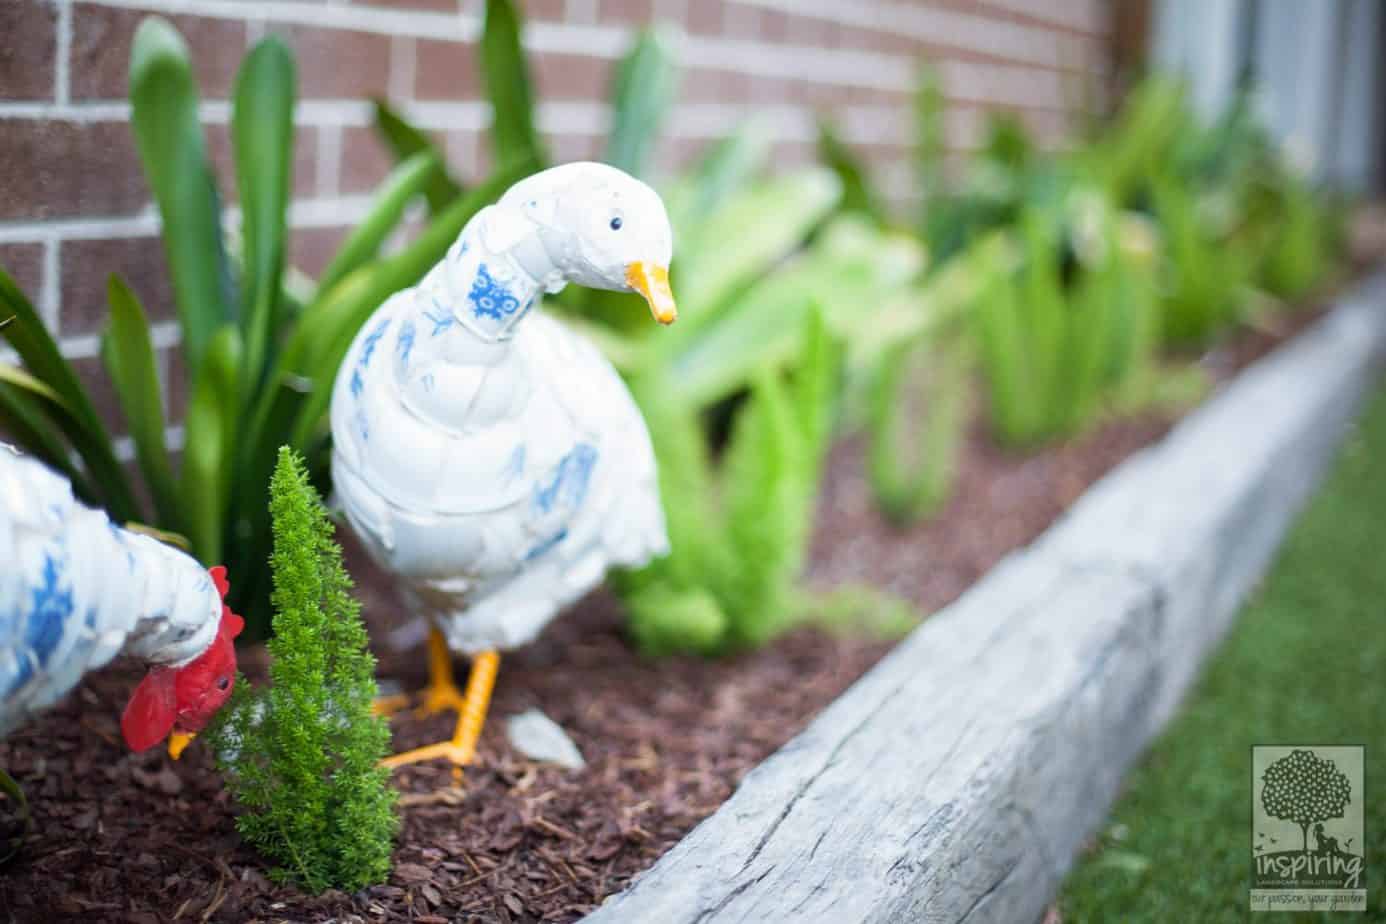 Cute ceramic duck and rooster used as garden accessory in Glen Waverley landscape design